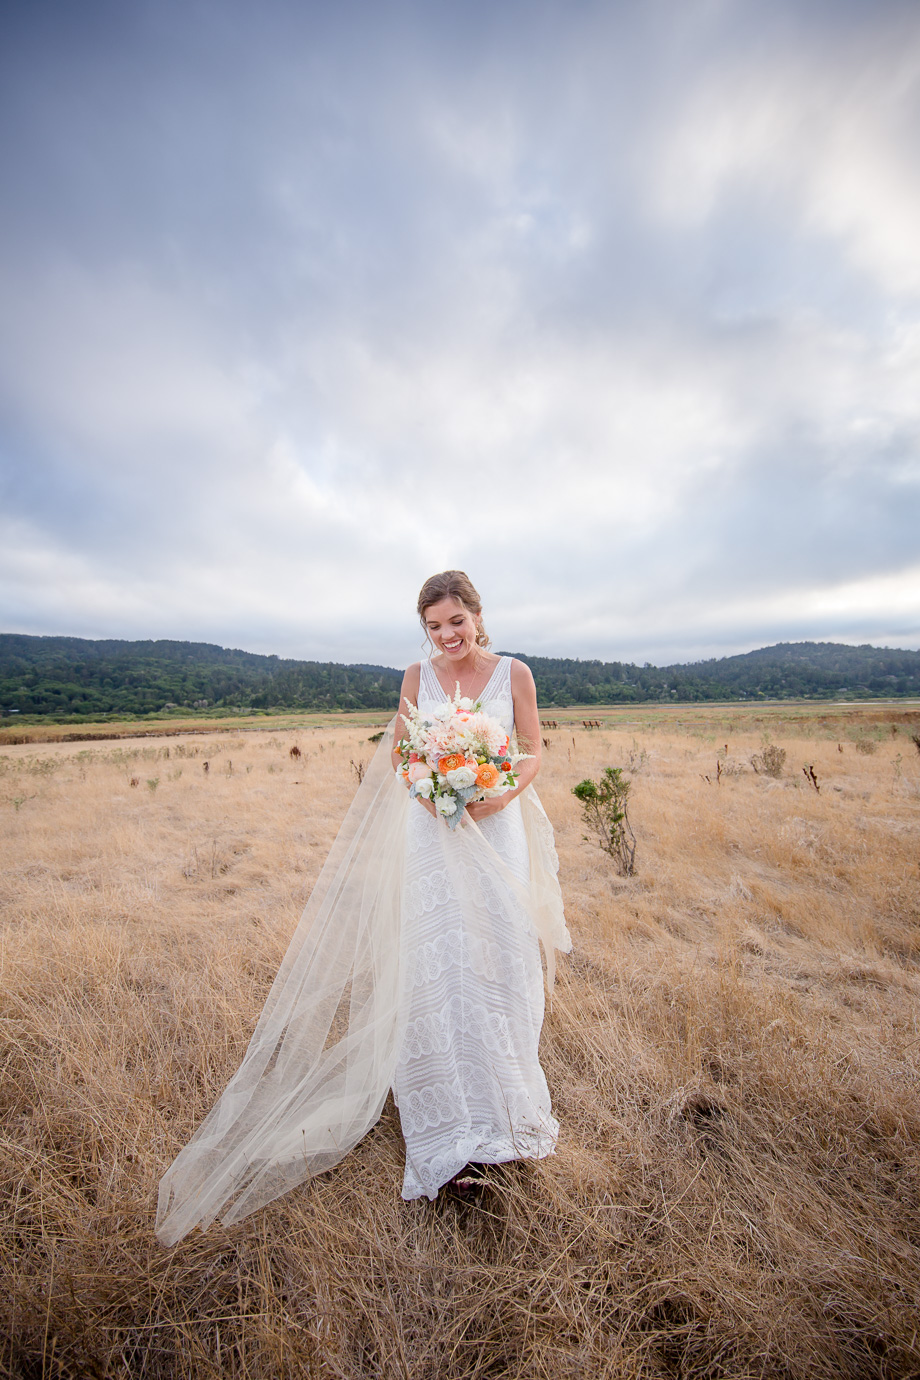 lush wedding bouquet, romantic sheath lace wedding gown with ivory chapel length veil - California Point Reyes Station wedding photographer